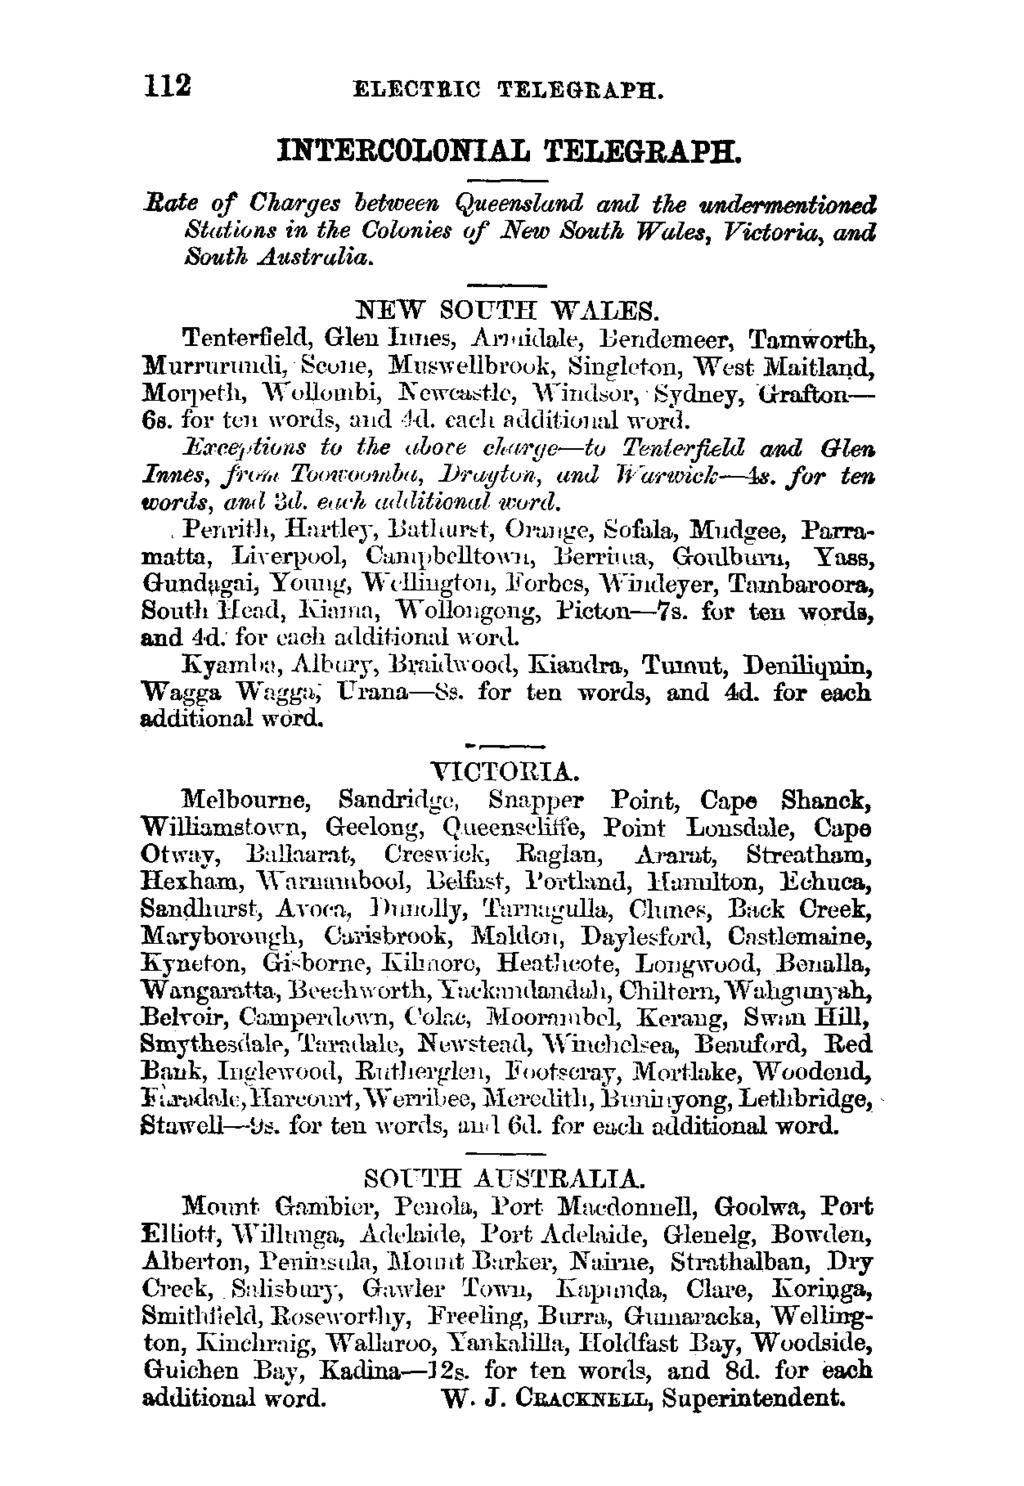 112 ELECTRIC TELEGEAPR. INTERCOLONIAL TELEGRAPH. -Rate of Charges between Queensland and the undermentioned Stations in the Colonies of New South Wales, Victoria, and South Australia. NEW SOUTH WALES.